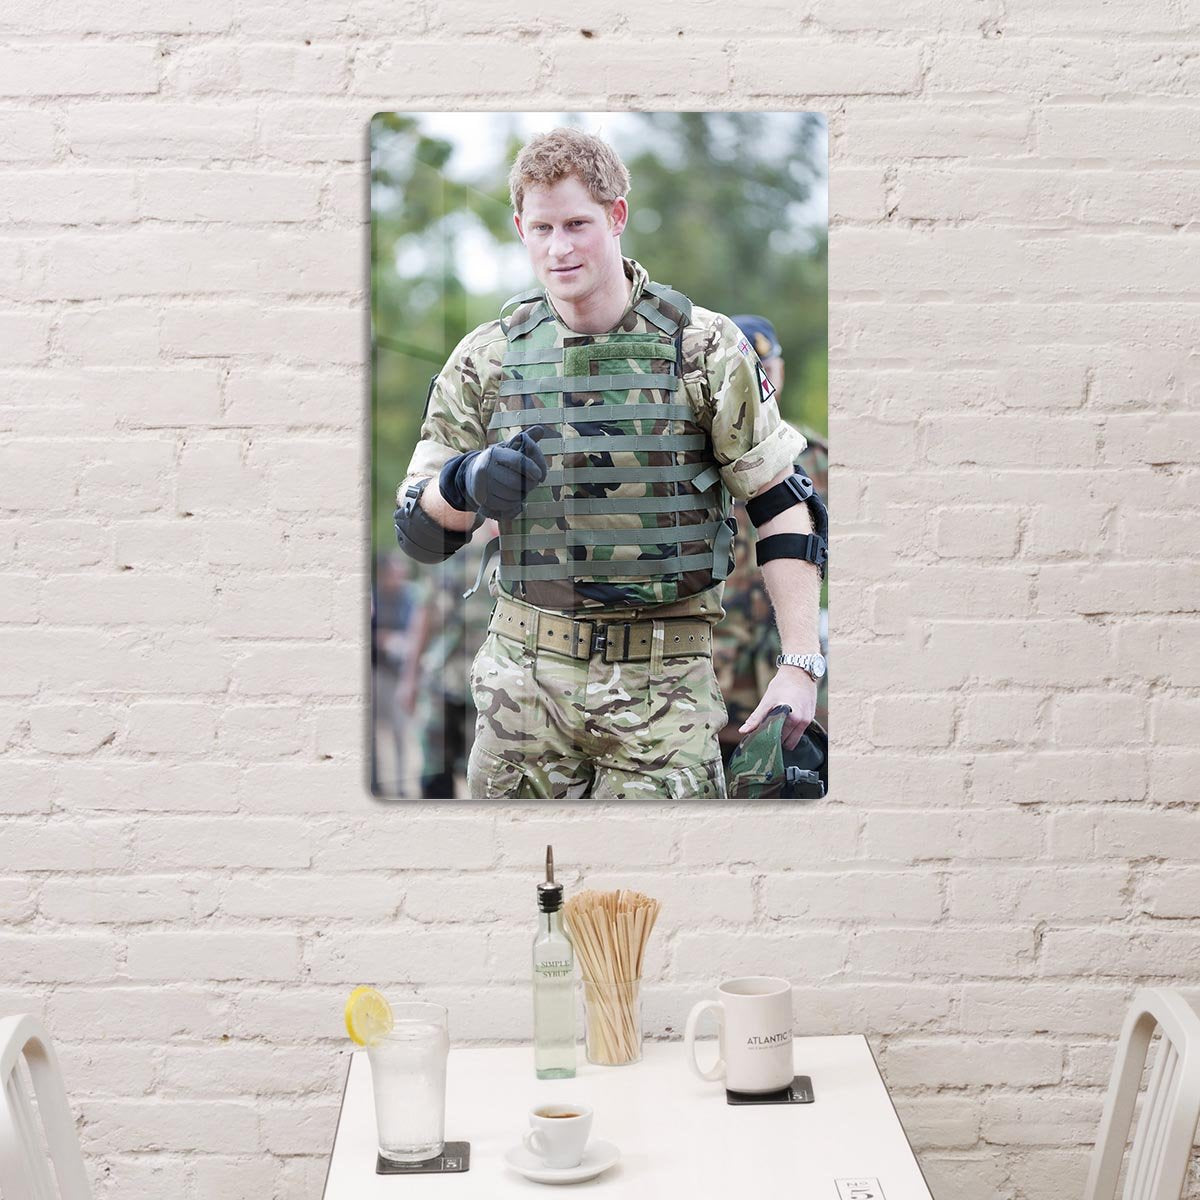 Prince Harry at the Jamaican Defence Force in Jamaica HD Metal Print